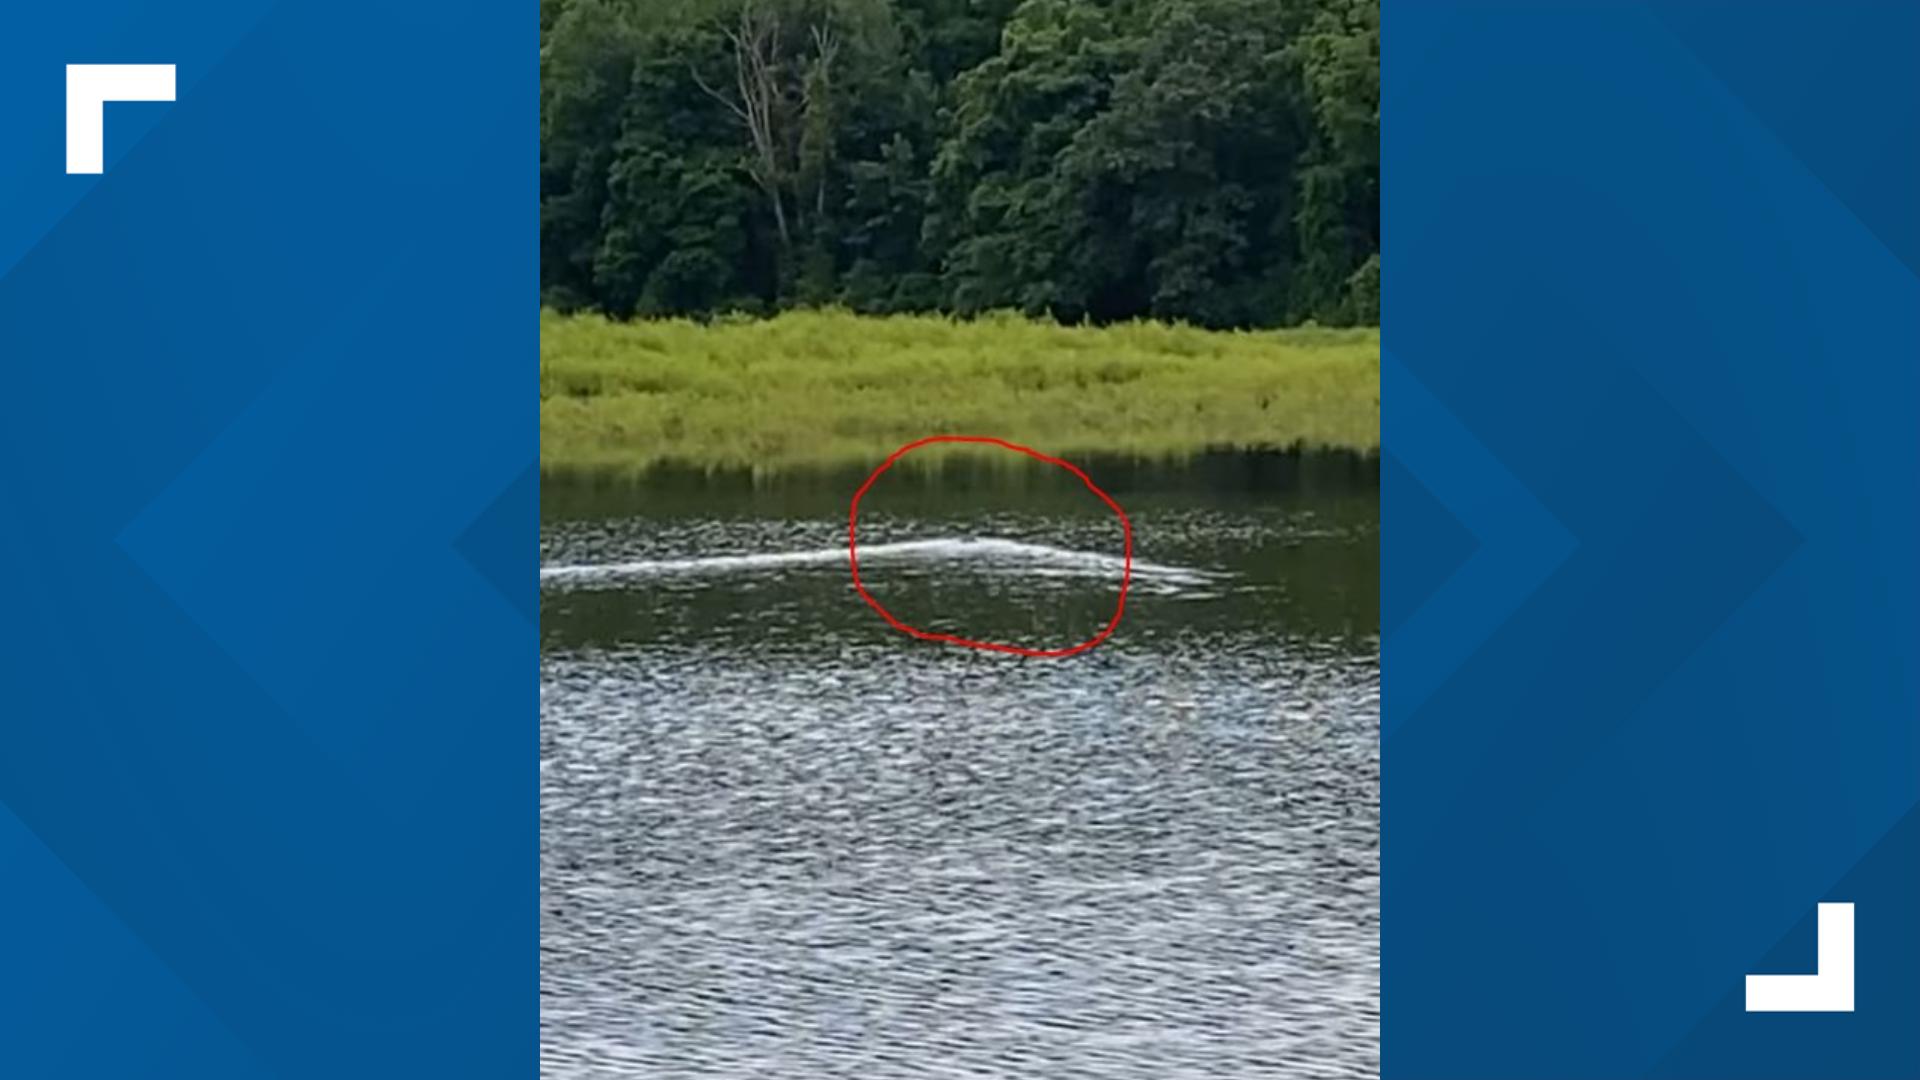 Video taken by Nathan Miller at Lake Redman, shared to his Facebook page.